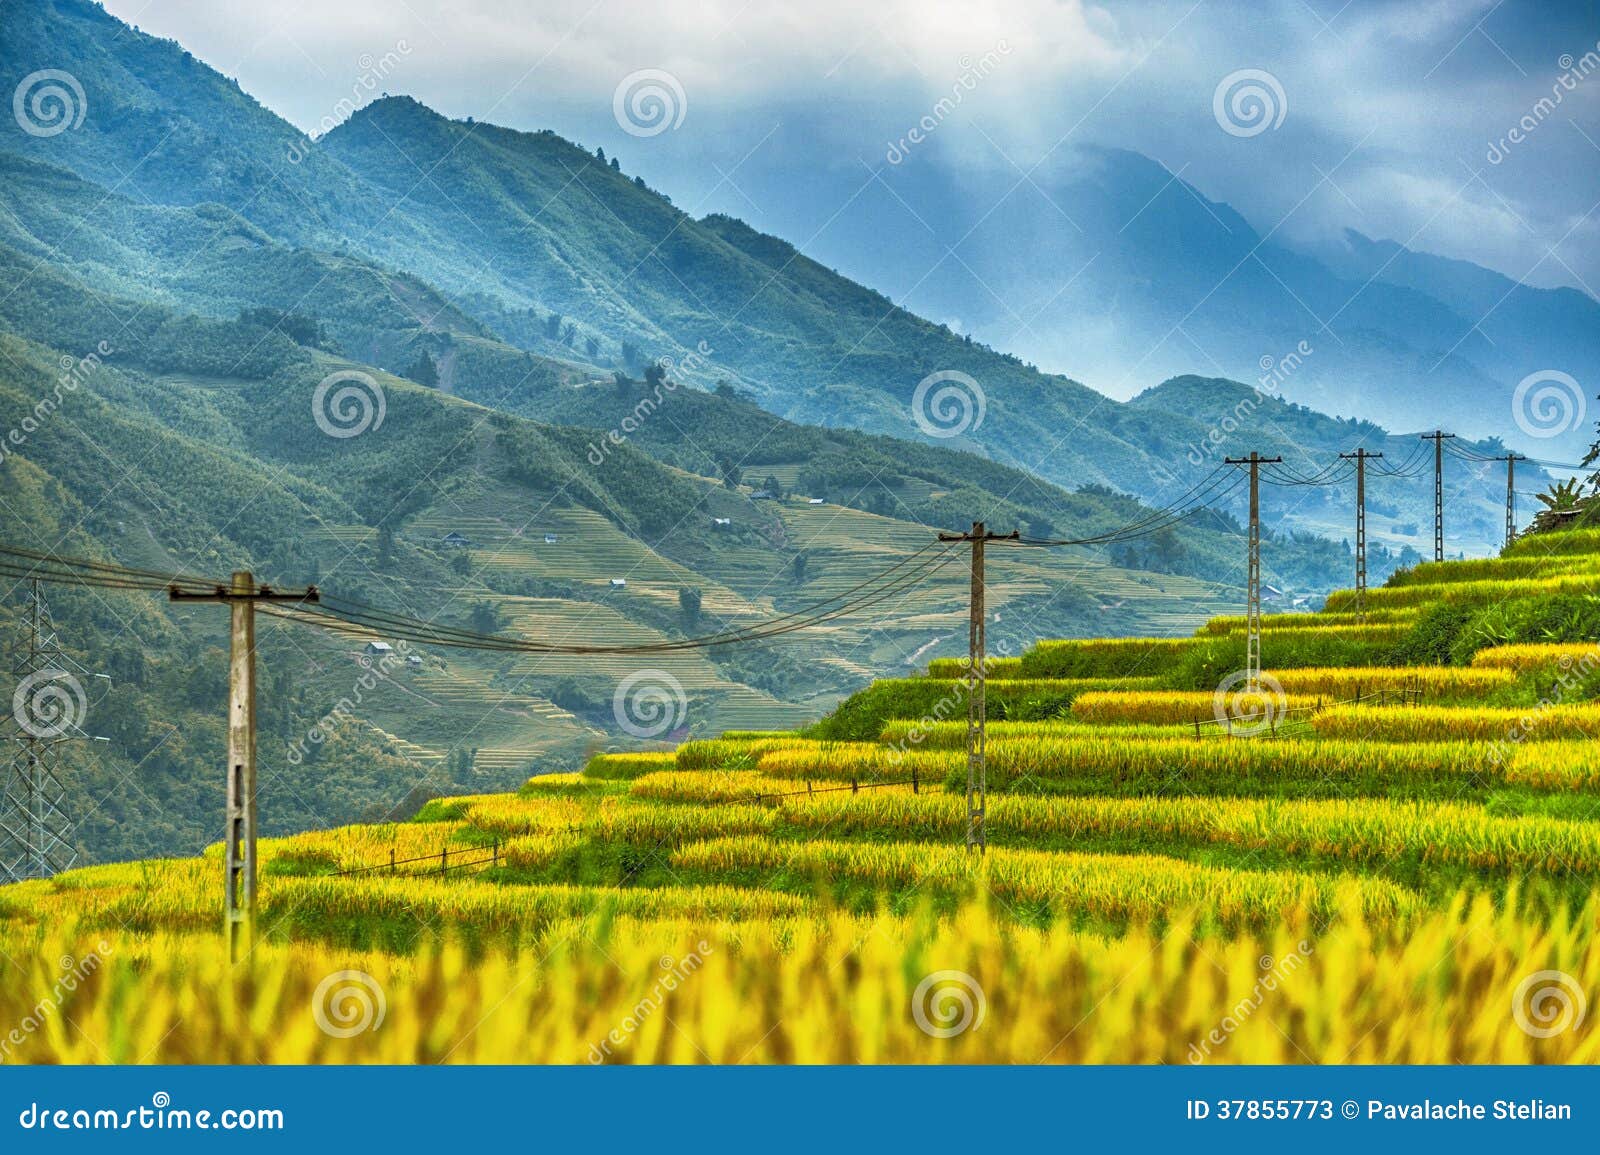 rice field terraces surrounded by a spectacular bl